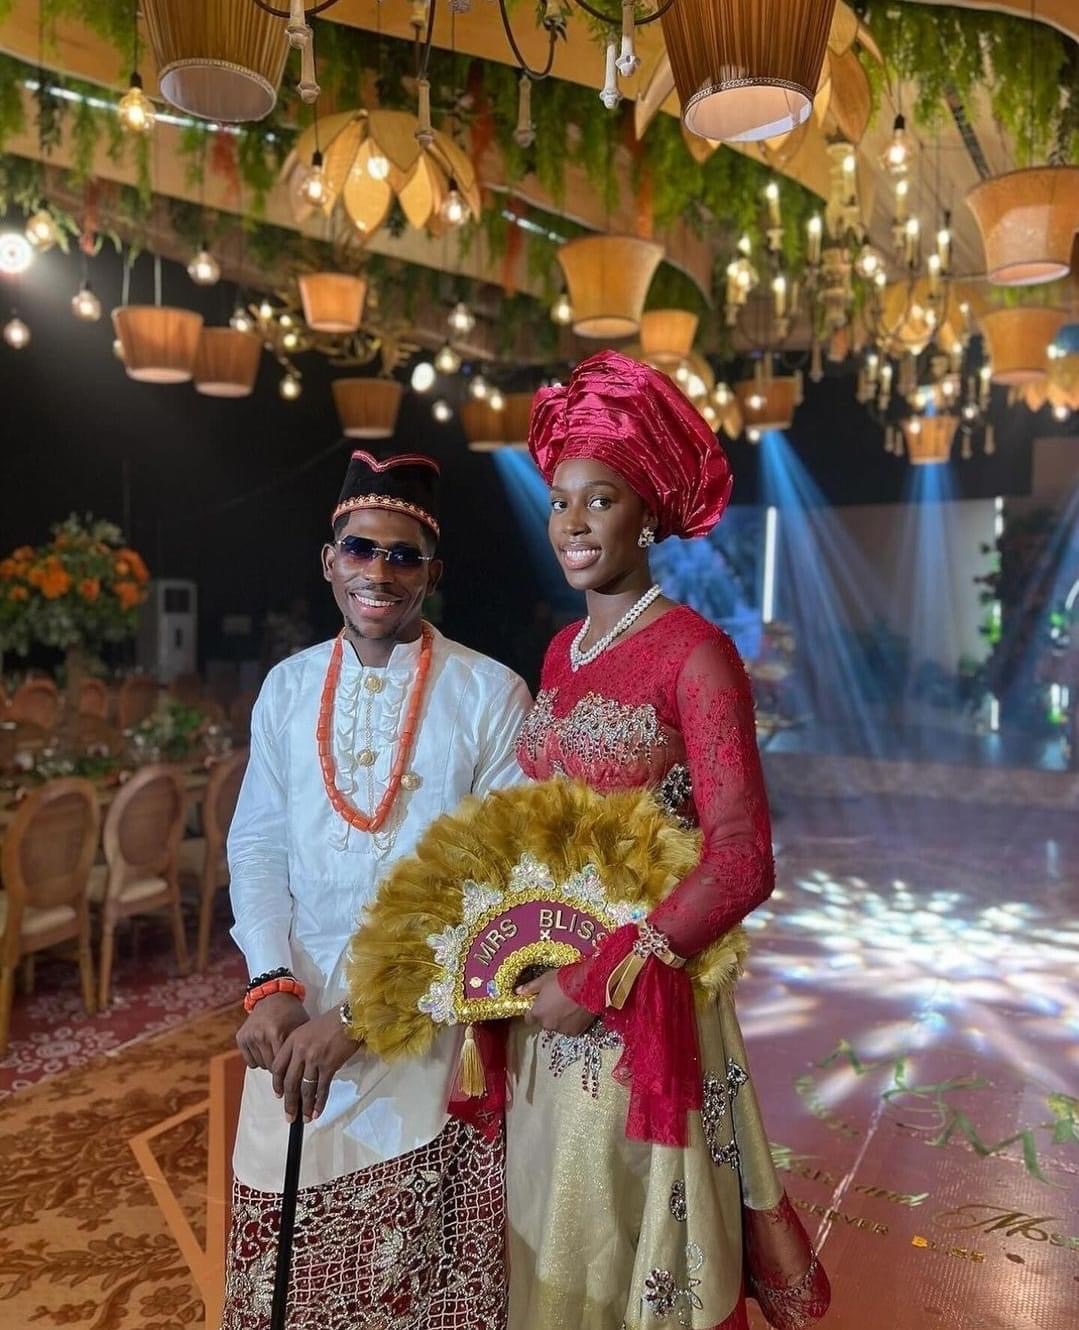 Moses Bliss weds his fiance Marie Wiseborn traditionally in Ghana (photos)